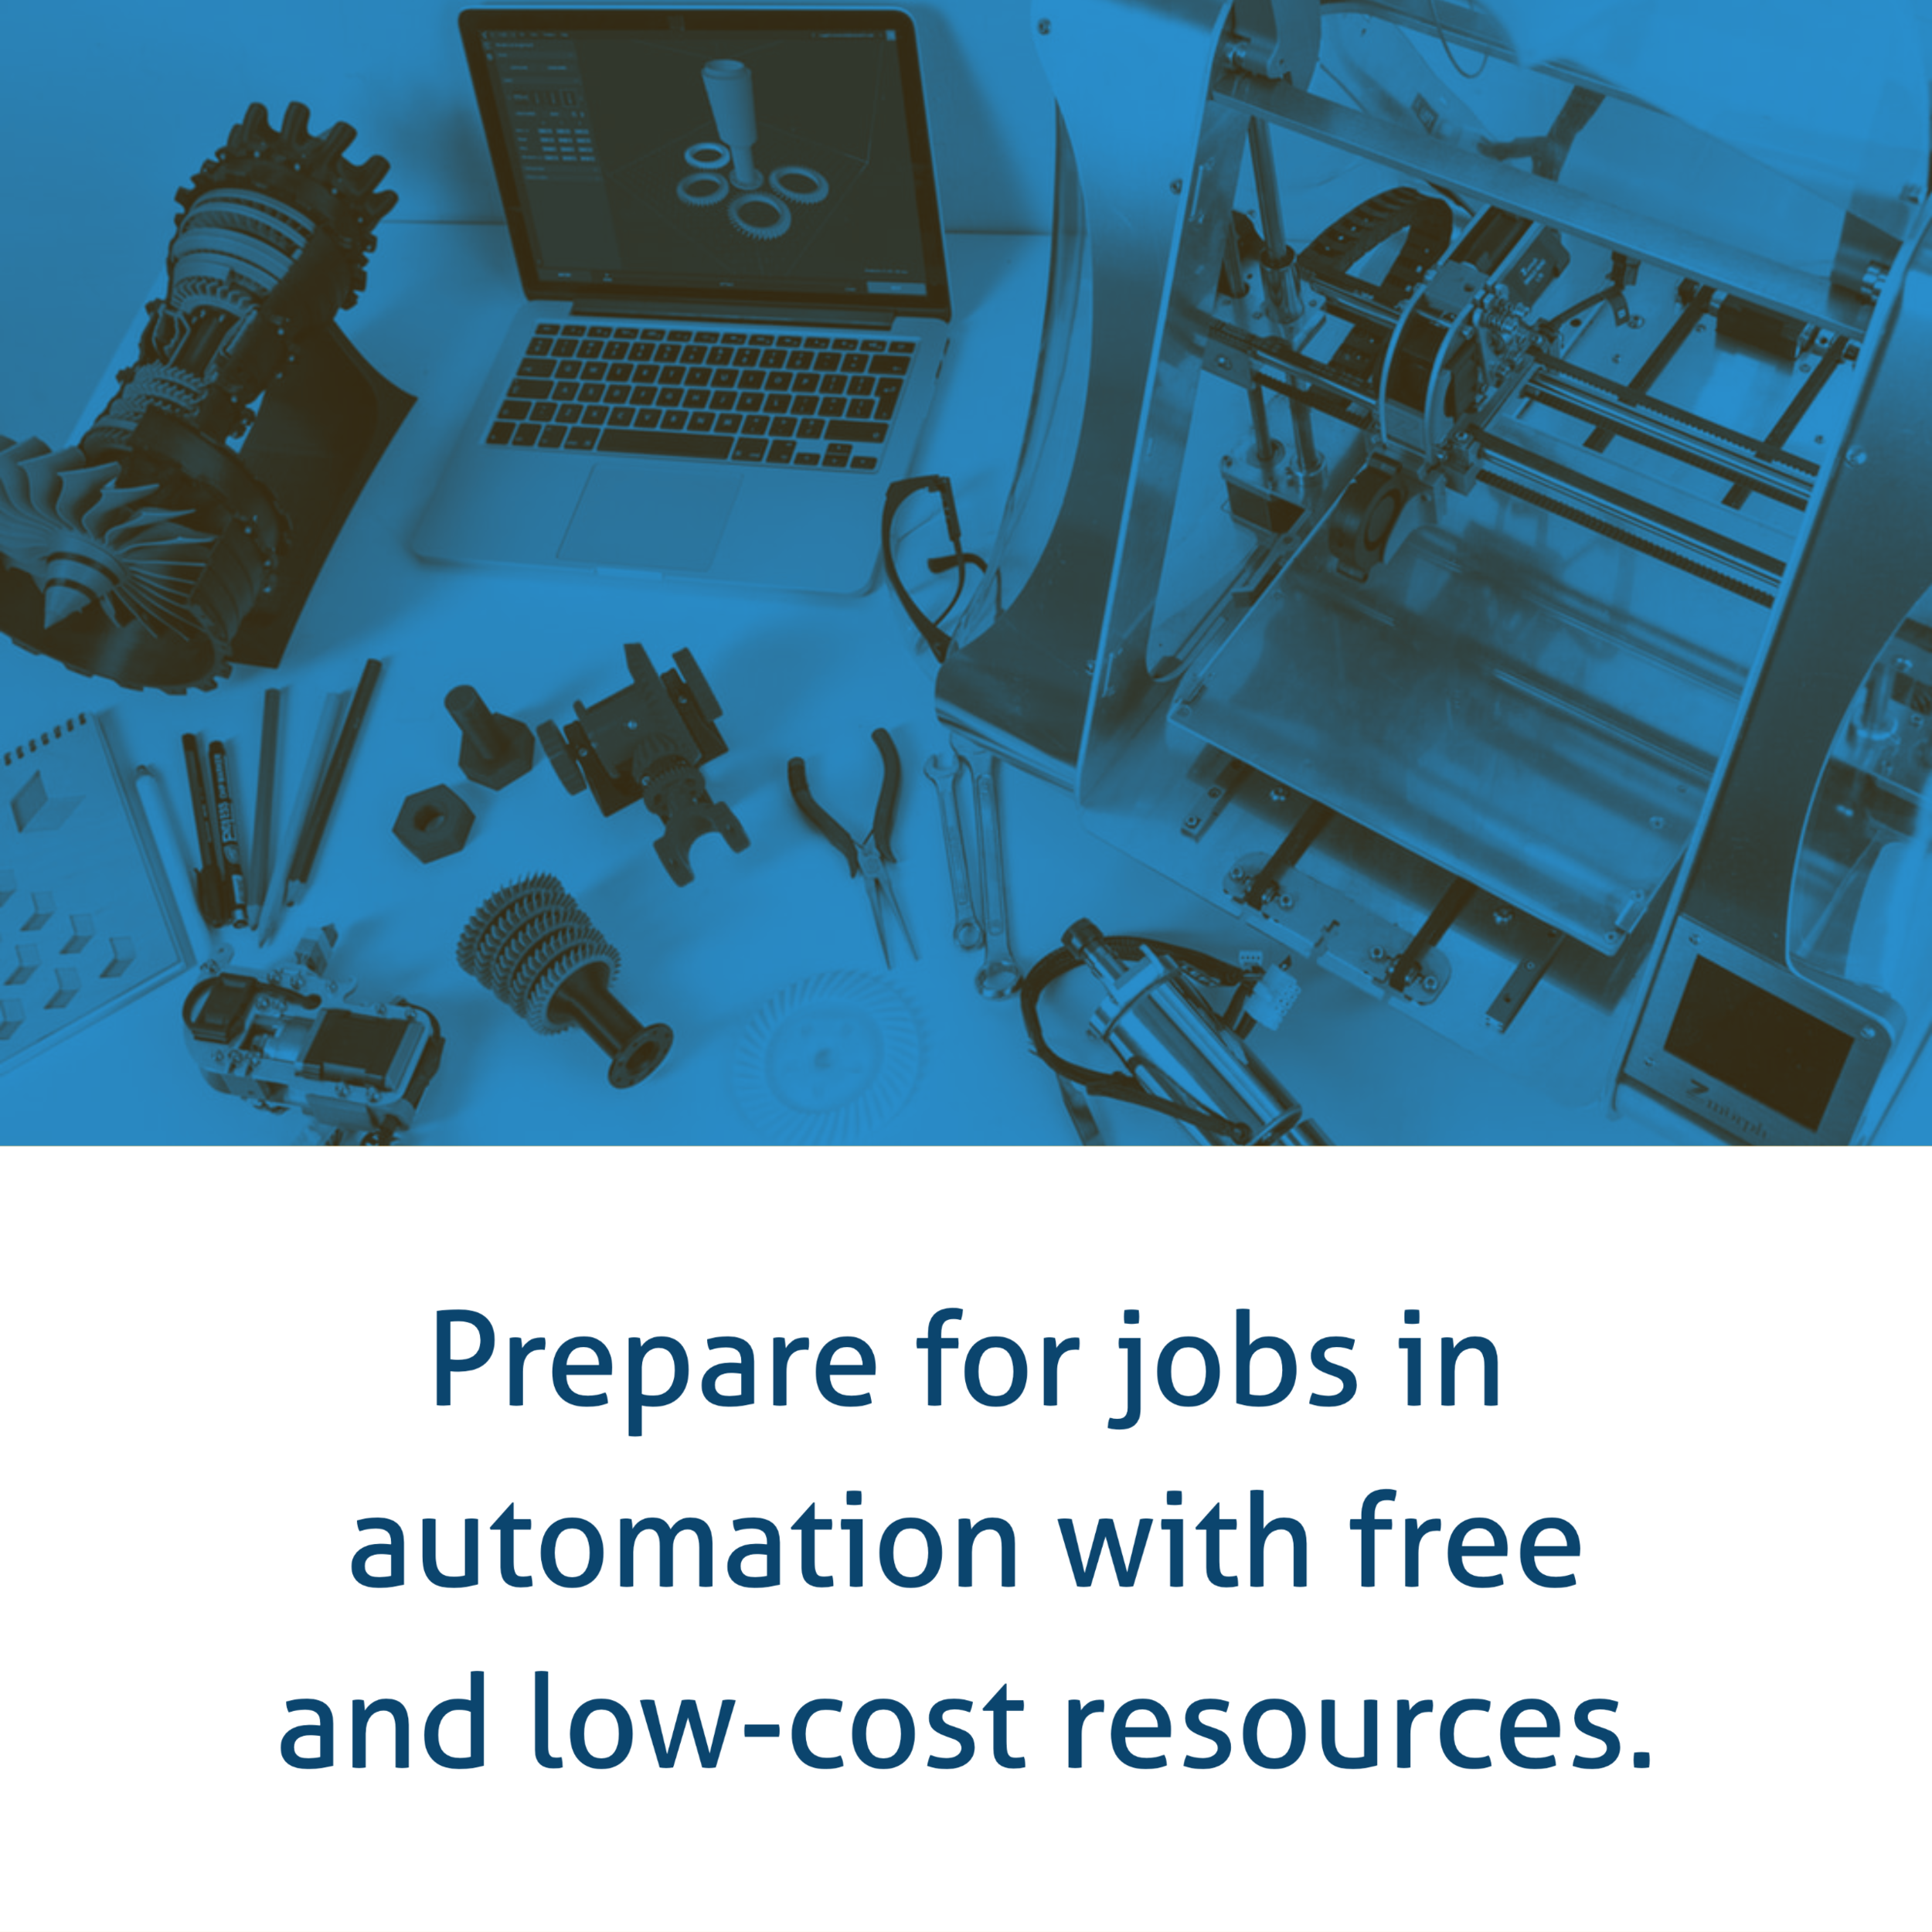 Prepare for jobs in automation with free and low-cost resources.